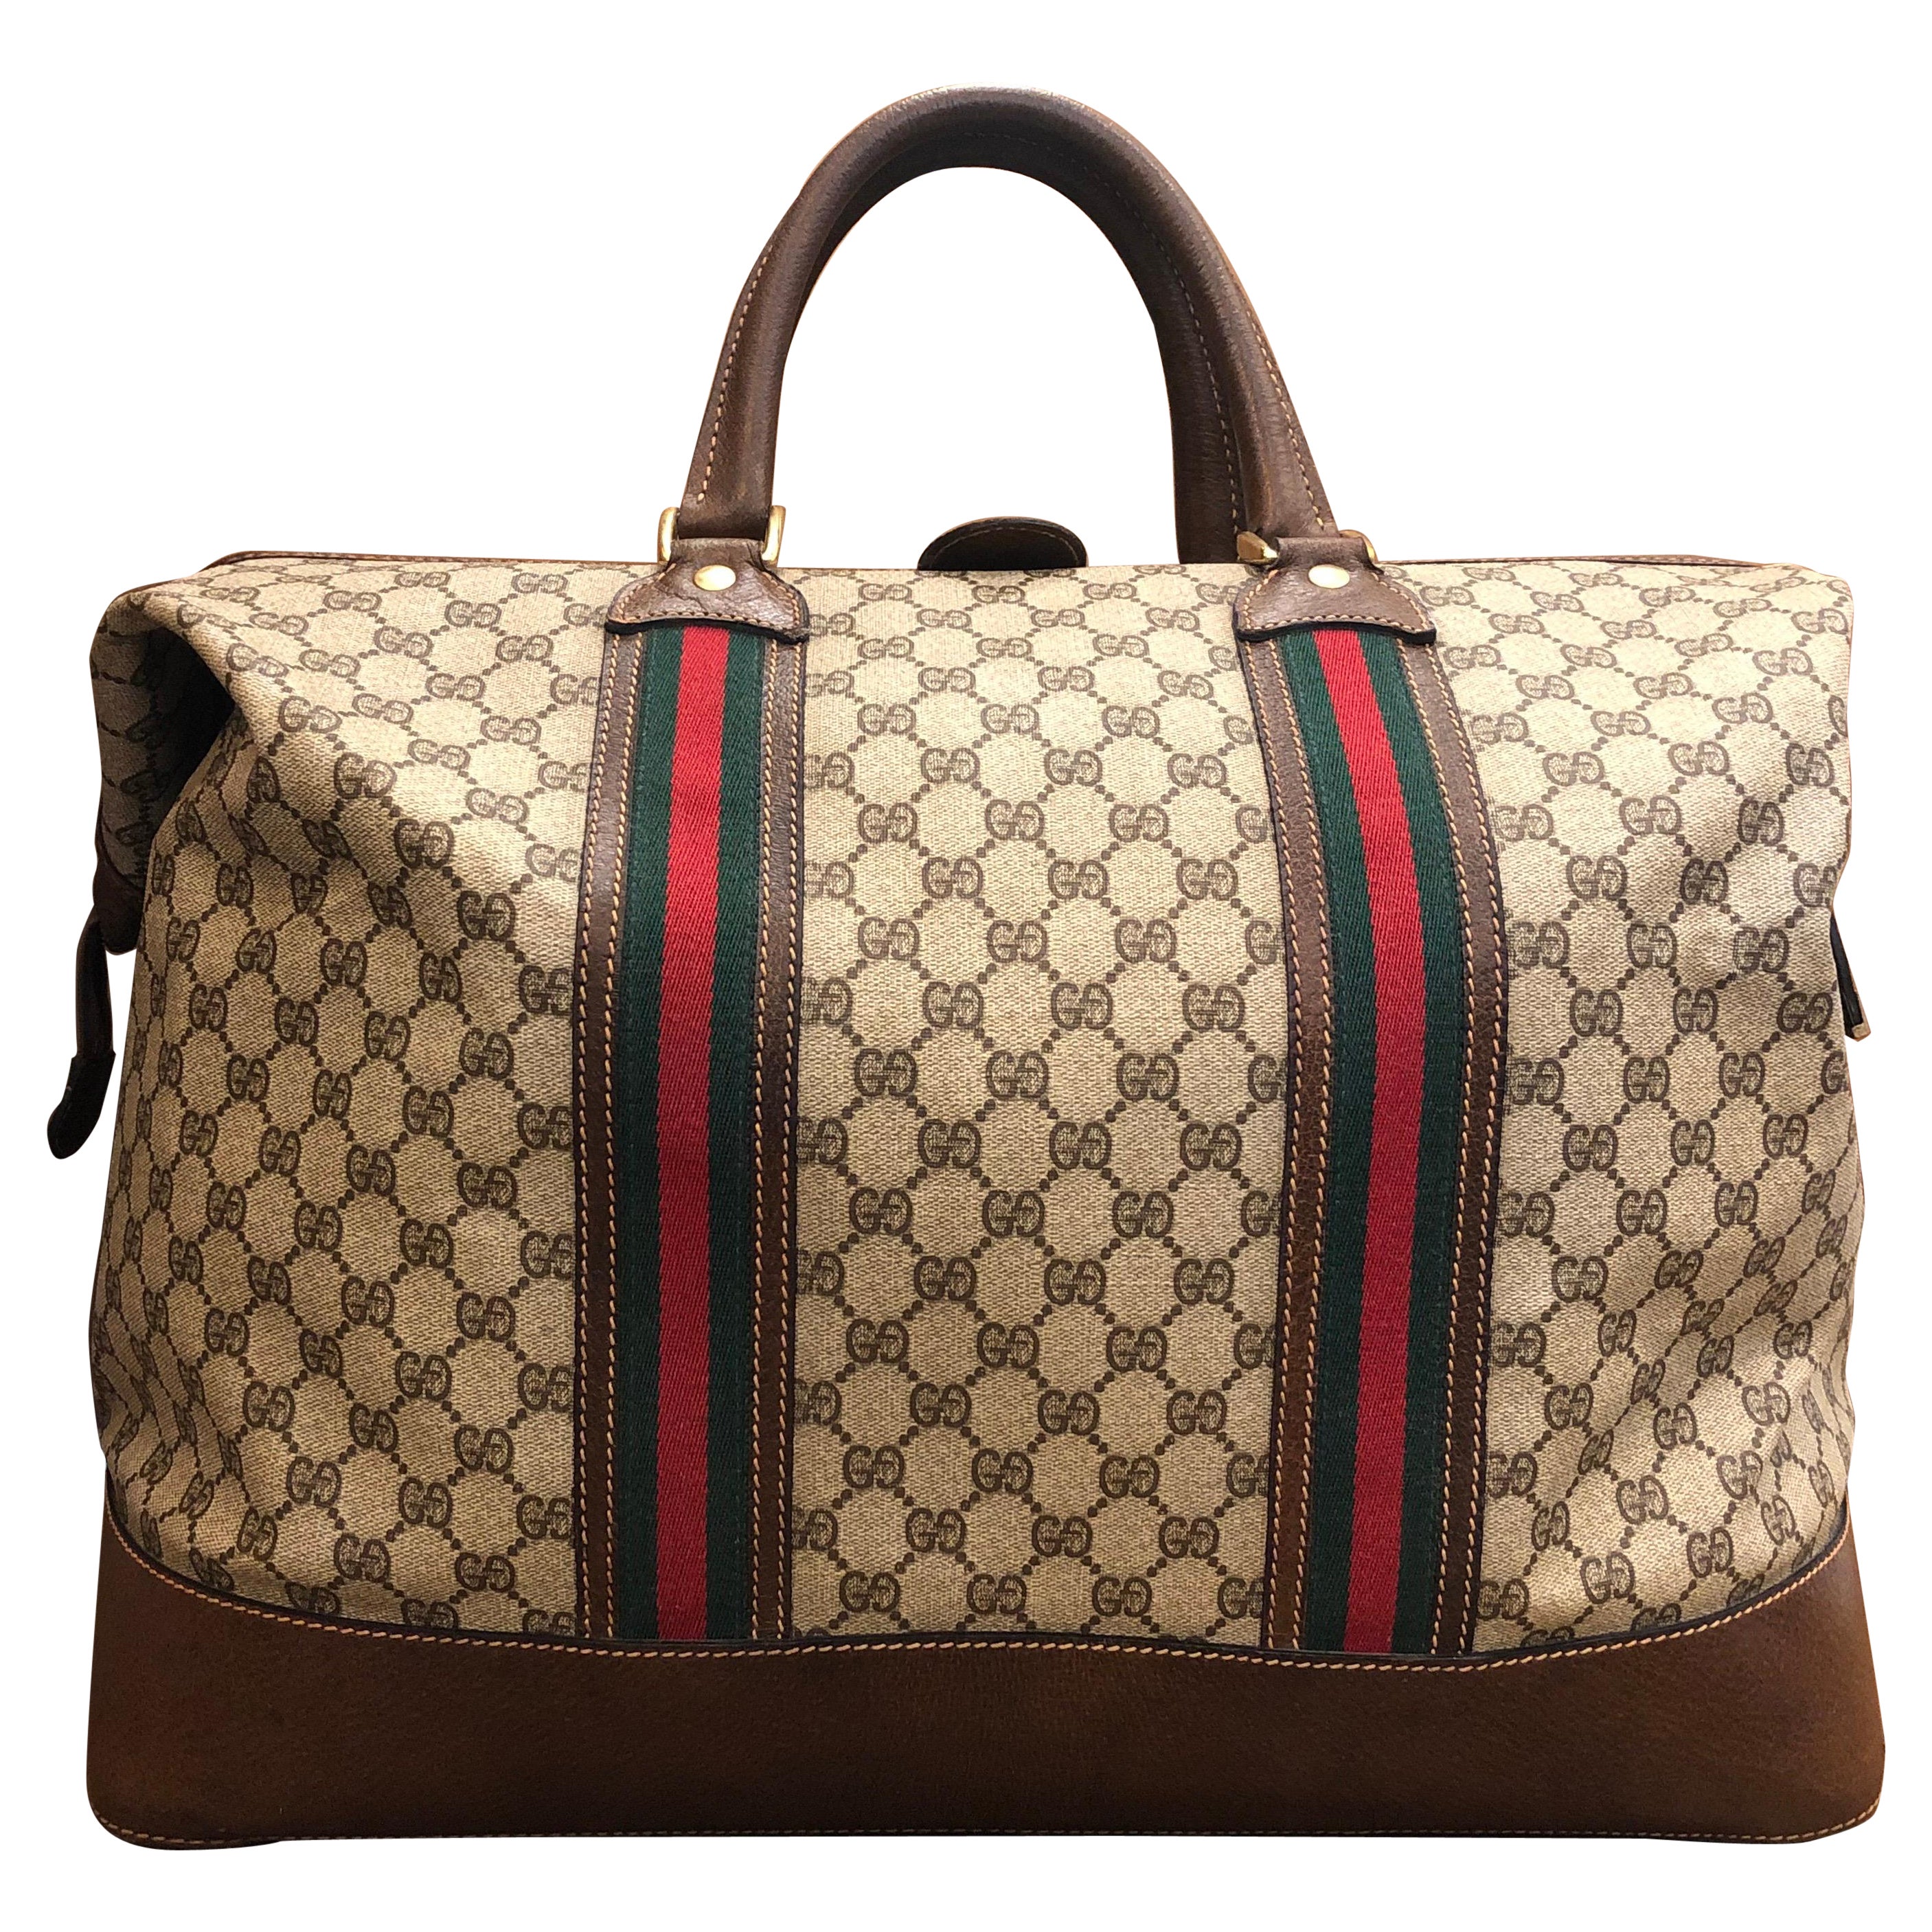 1990s Tom Ford for Gucci Coated Canvas Monogram Boston Bag in Navy